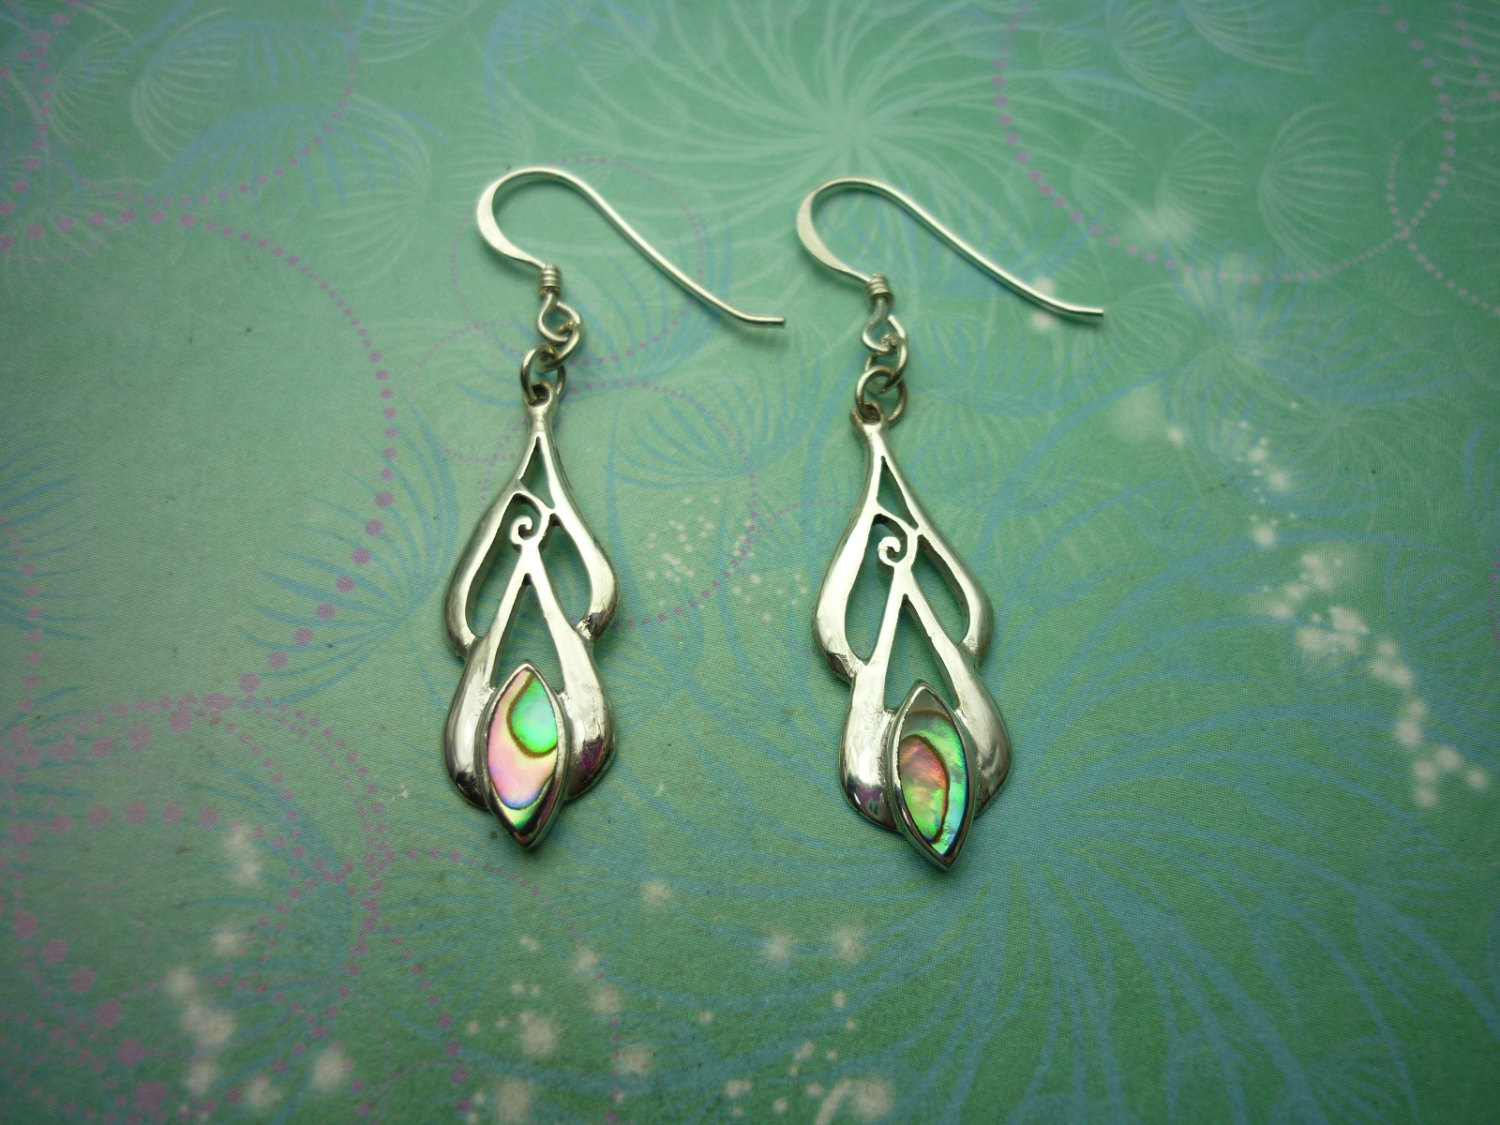 Vintage Sterling Silver Earrings - Abalone Paua Shell - 925 Hallmarked - Style 3